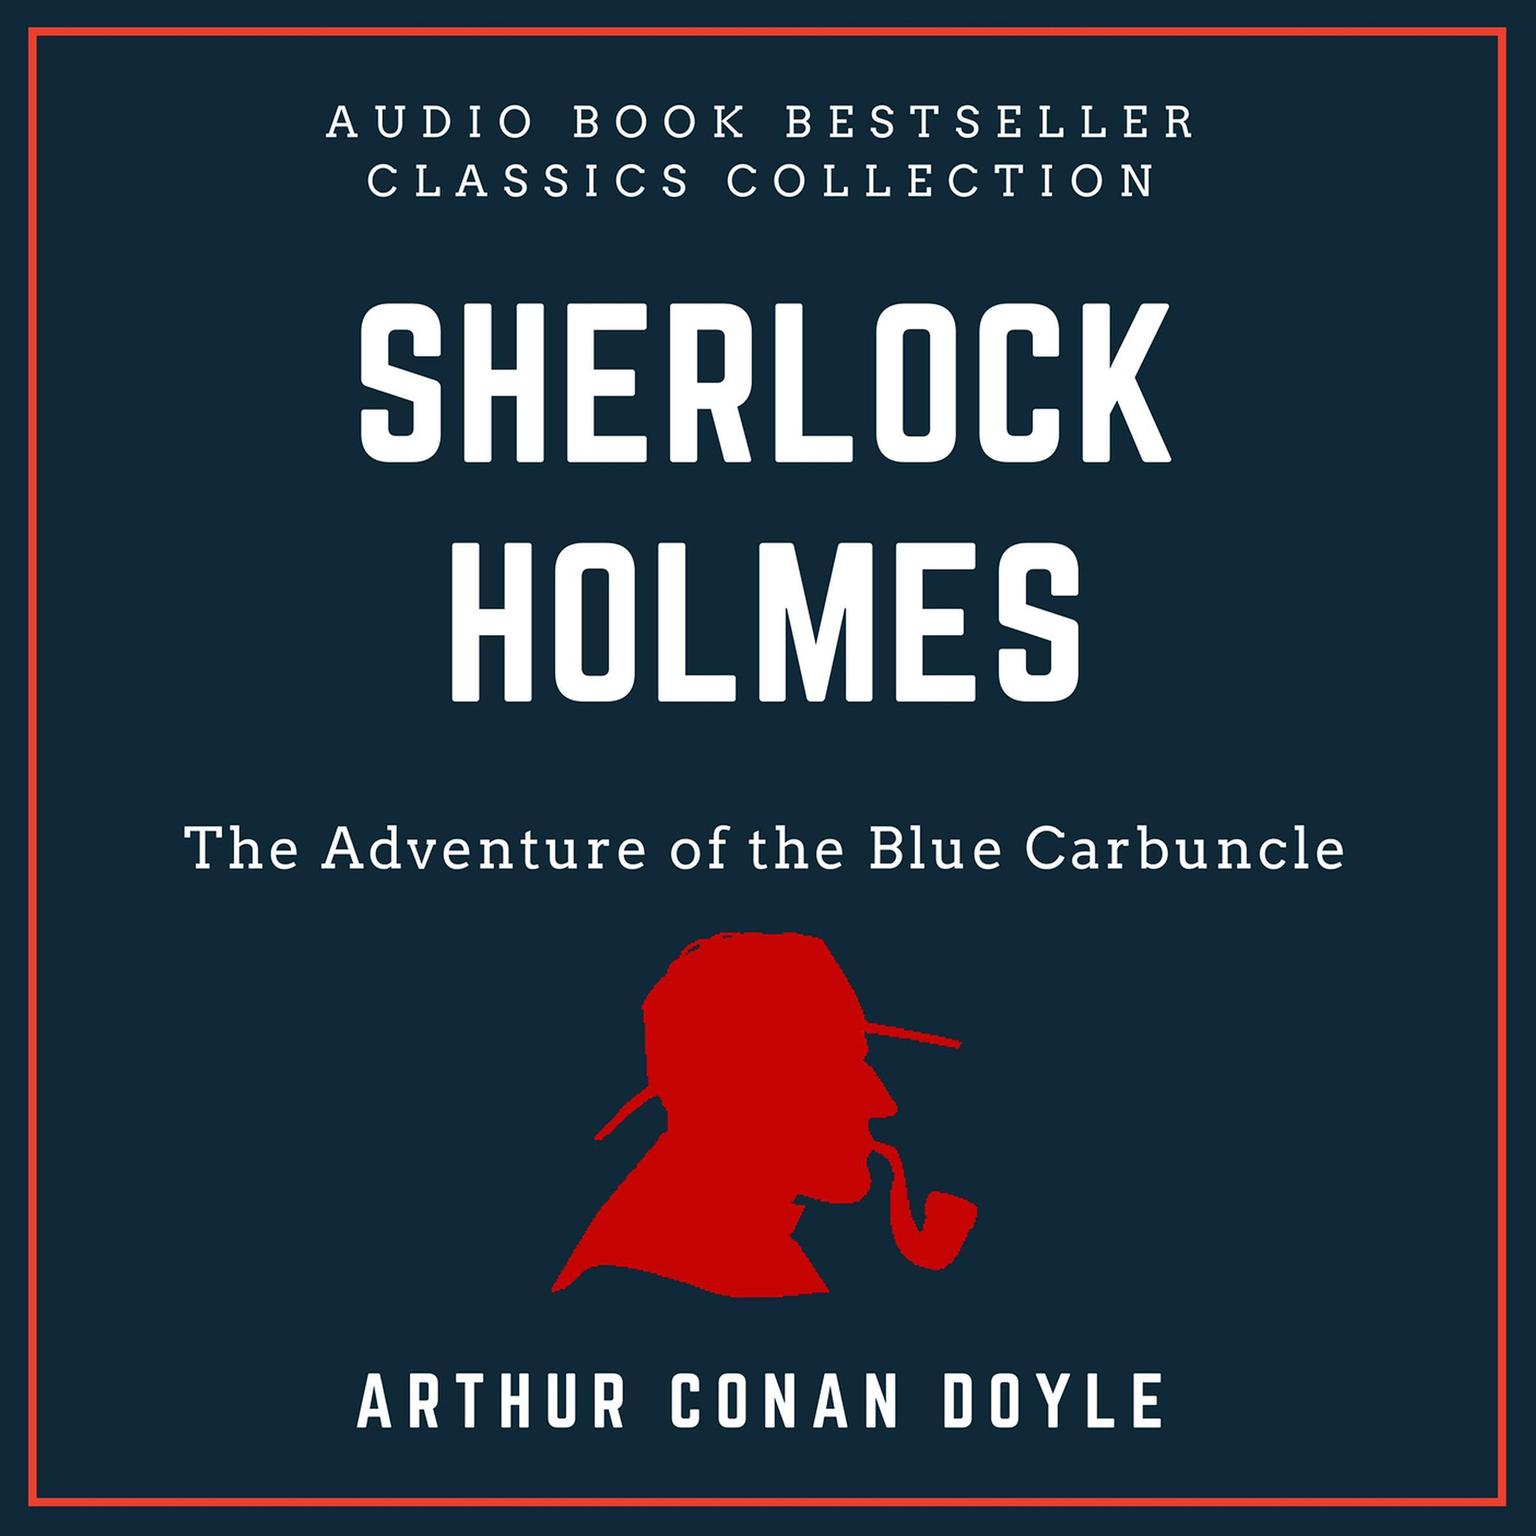 Sherlock Holmes: The Adventure of the Blue Carbuncle. Audio Book Bestseller Classics Collection Audiobook, by Arthur Conan Doyle